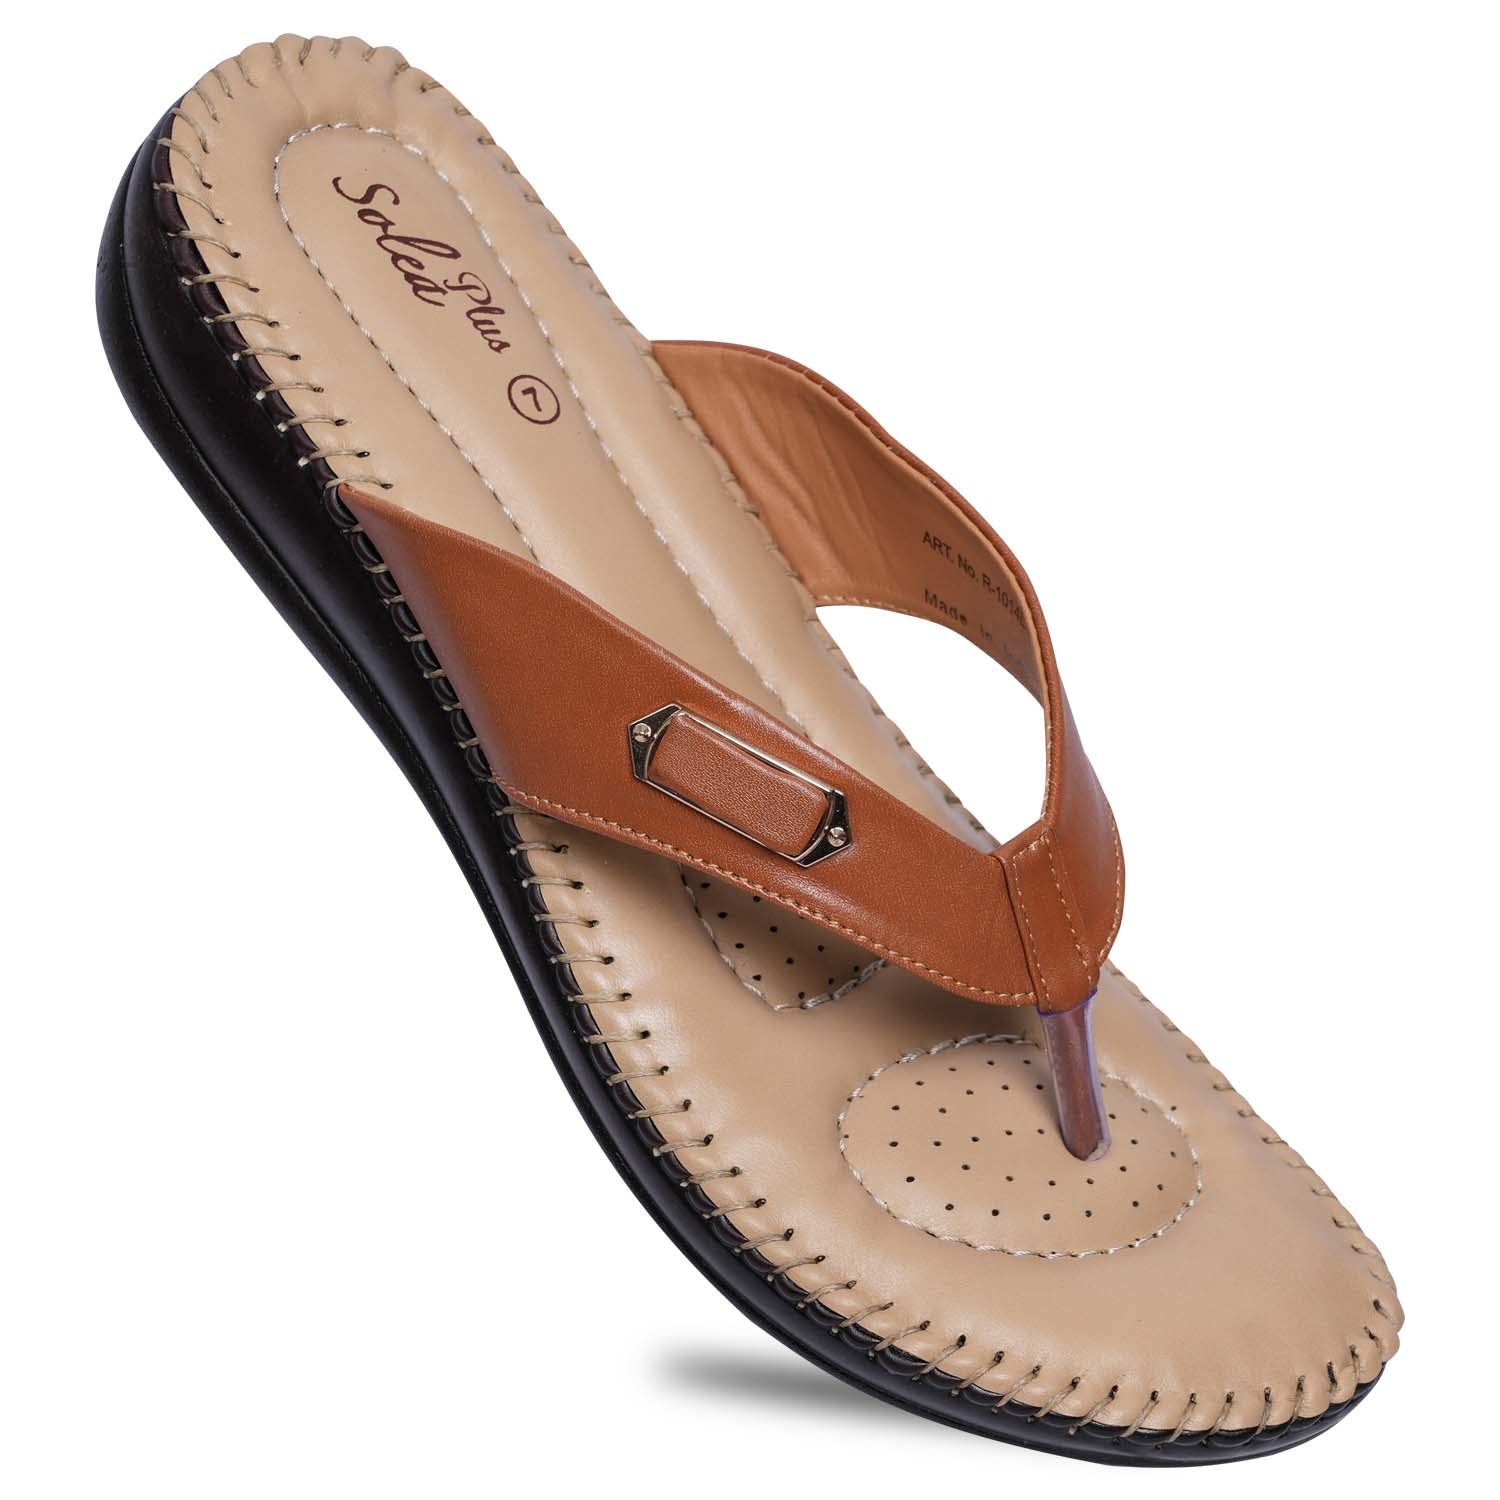 Paragon R1014L Women Sandals | Casual &amp; Formal Sandals | Stylish, Comfortable &amp; Durable | For Daily &amp; Occasion Wear